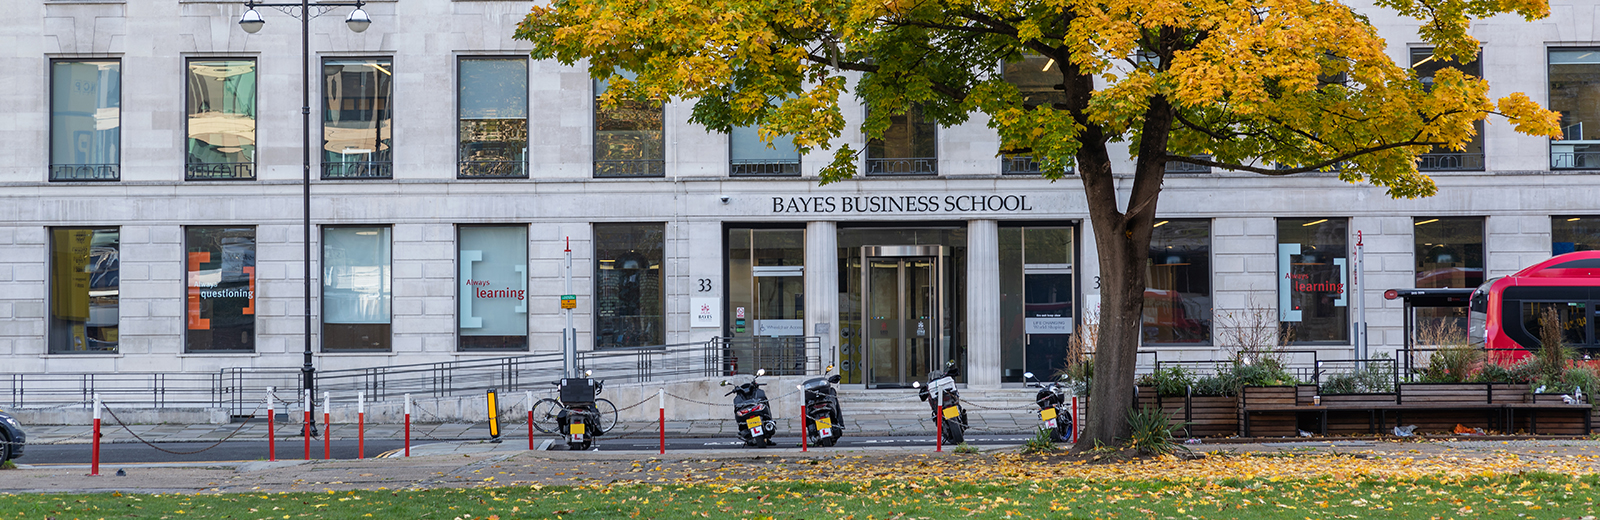 Bayes Business School building at Finsbury Square 